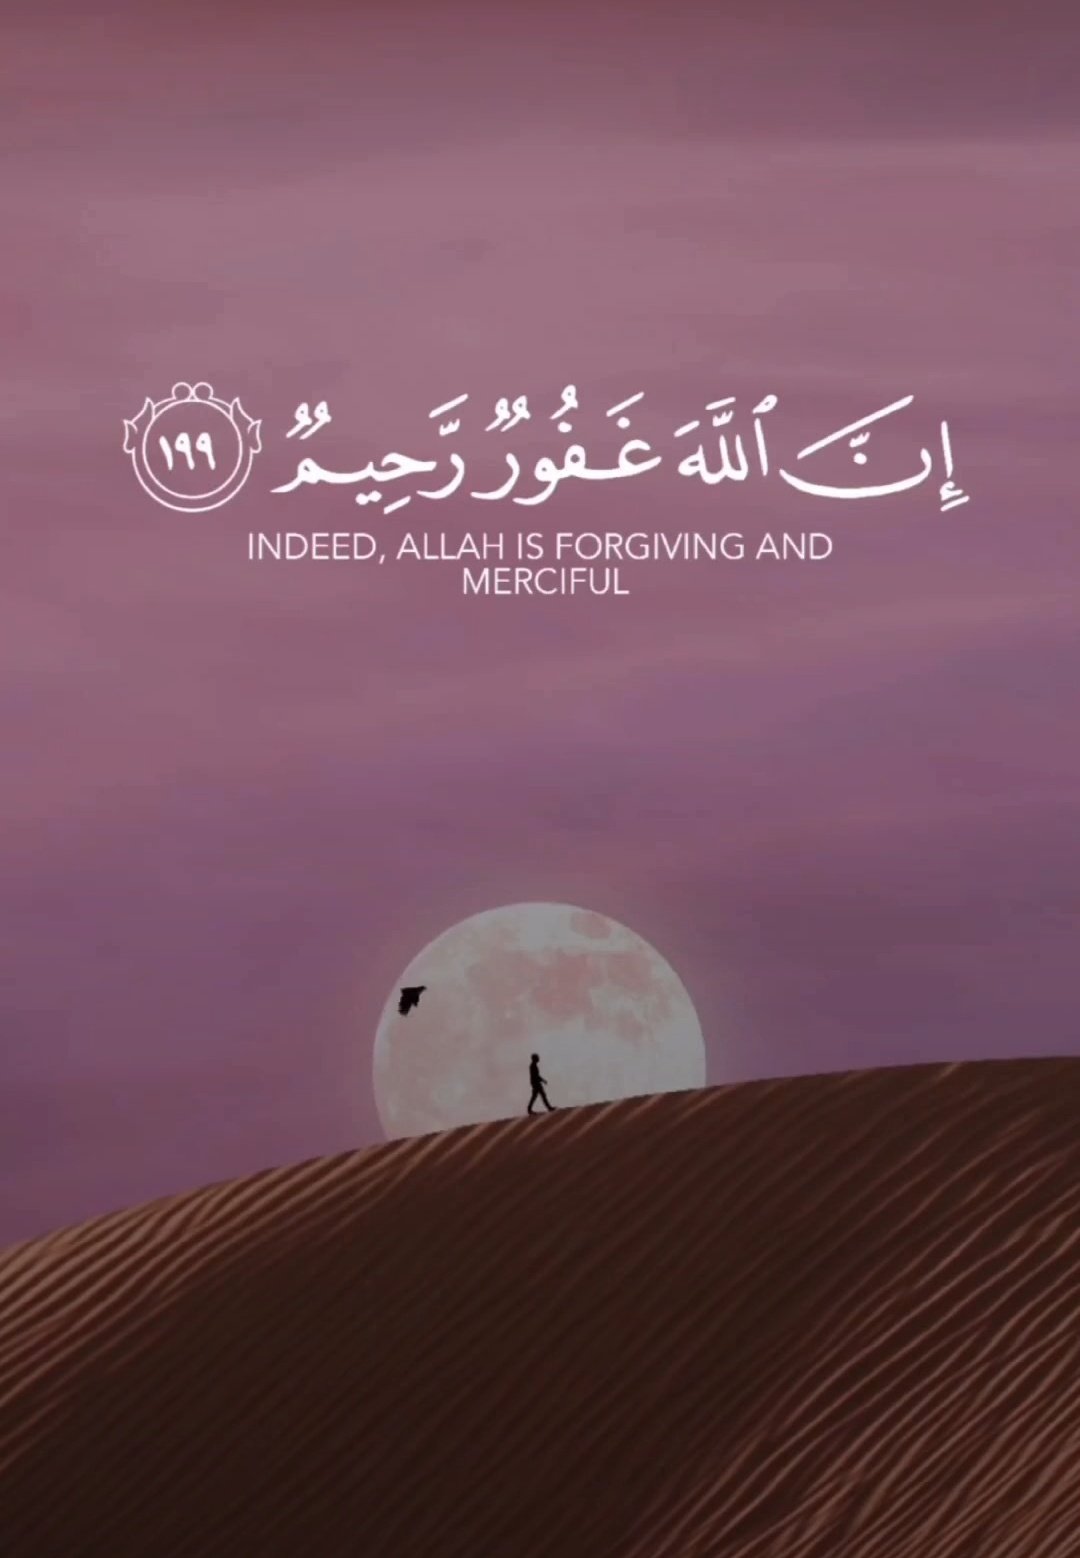 Awe-Inspiring Collection of Full 4K Islamic Quote Images: Over 999!